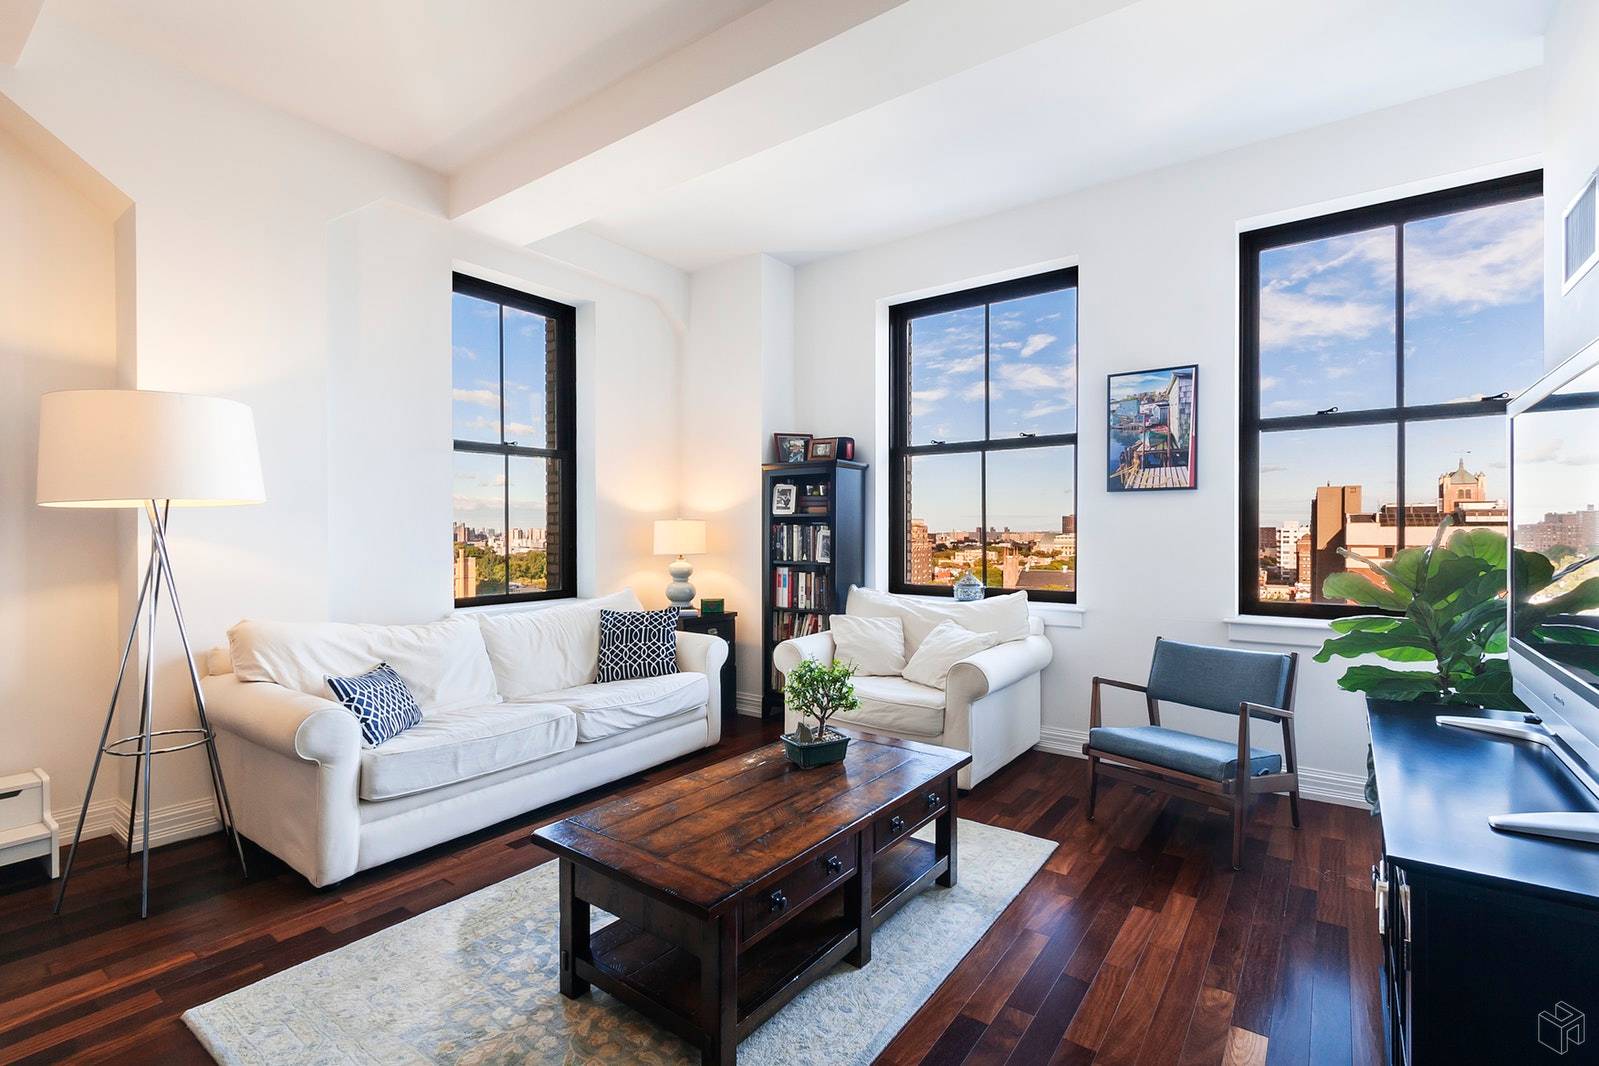 A Corner Home with Amazing ViewsThis massive, pre war, 15th floor apartment features an over sized, open living room with 10'6 beamed ceilings and big windows overlooking beautiful Fort Greene ...